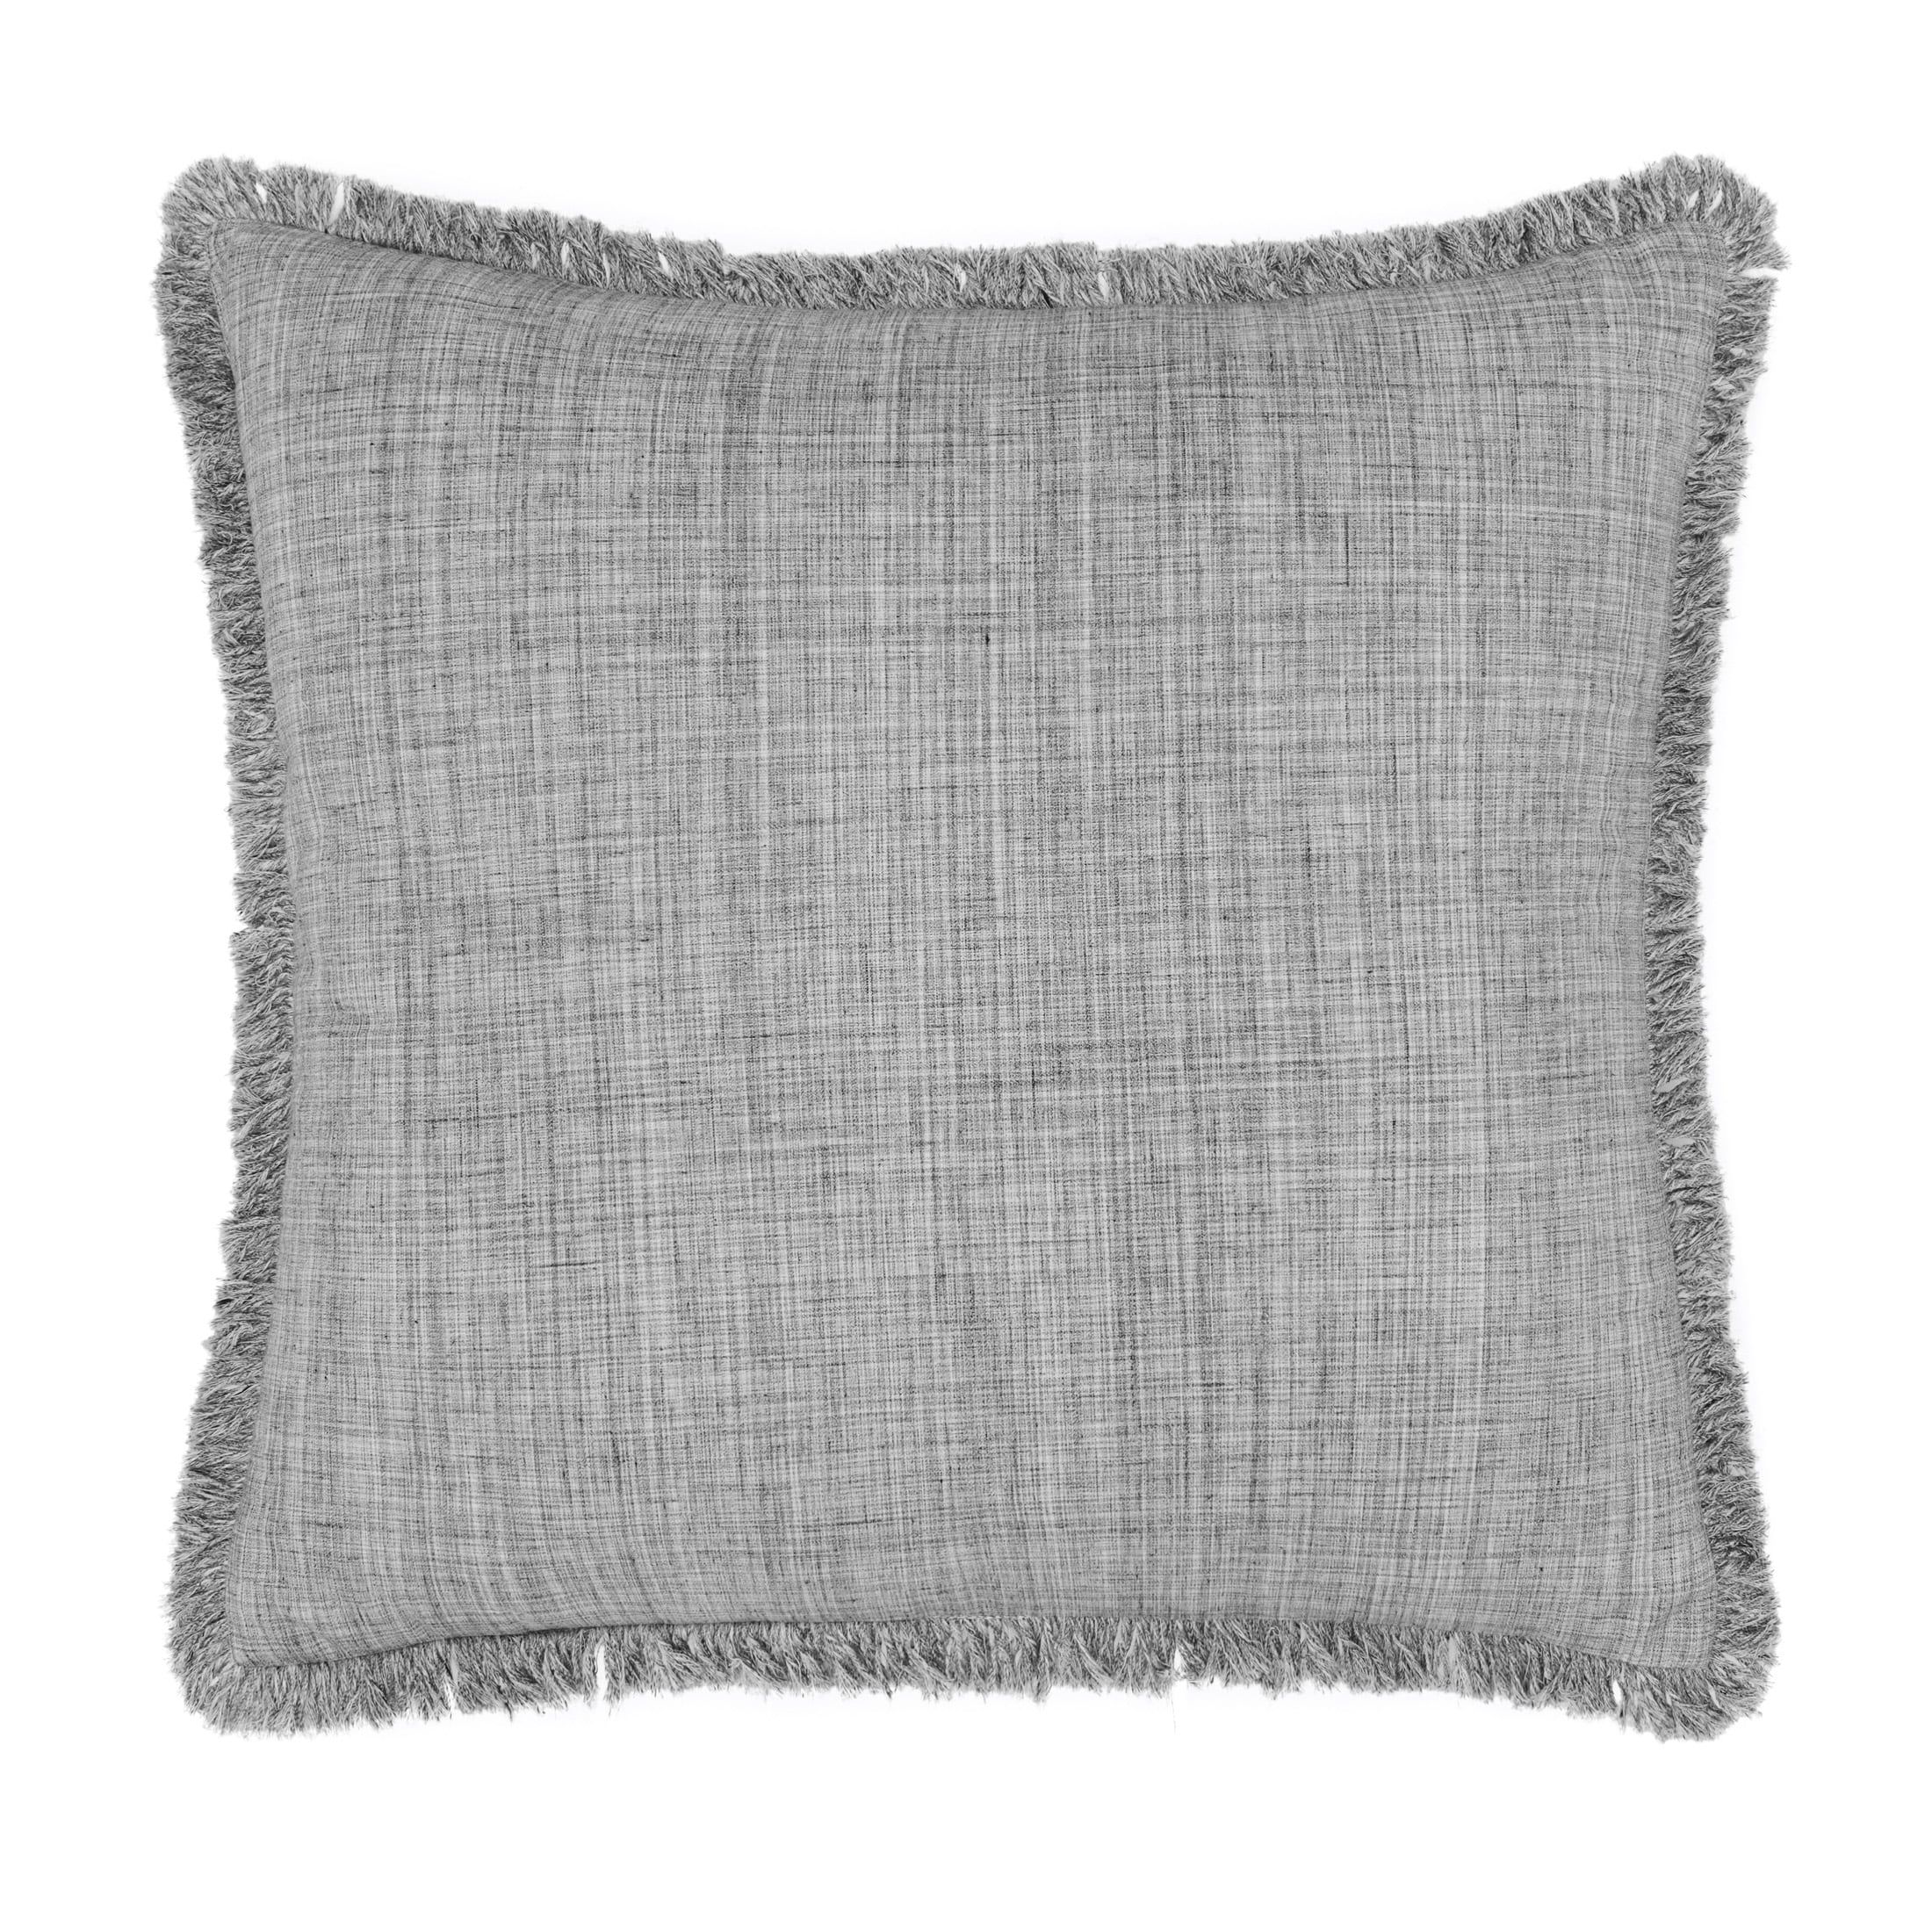 Gap Home Cross-Hatch Decorative Square Throw Pillow with Frayed Edge Grey 22" x 22" | Walmart (US)